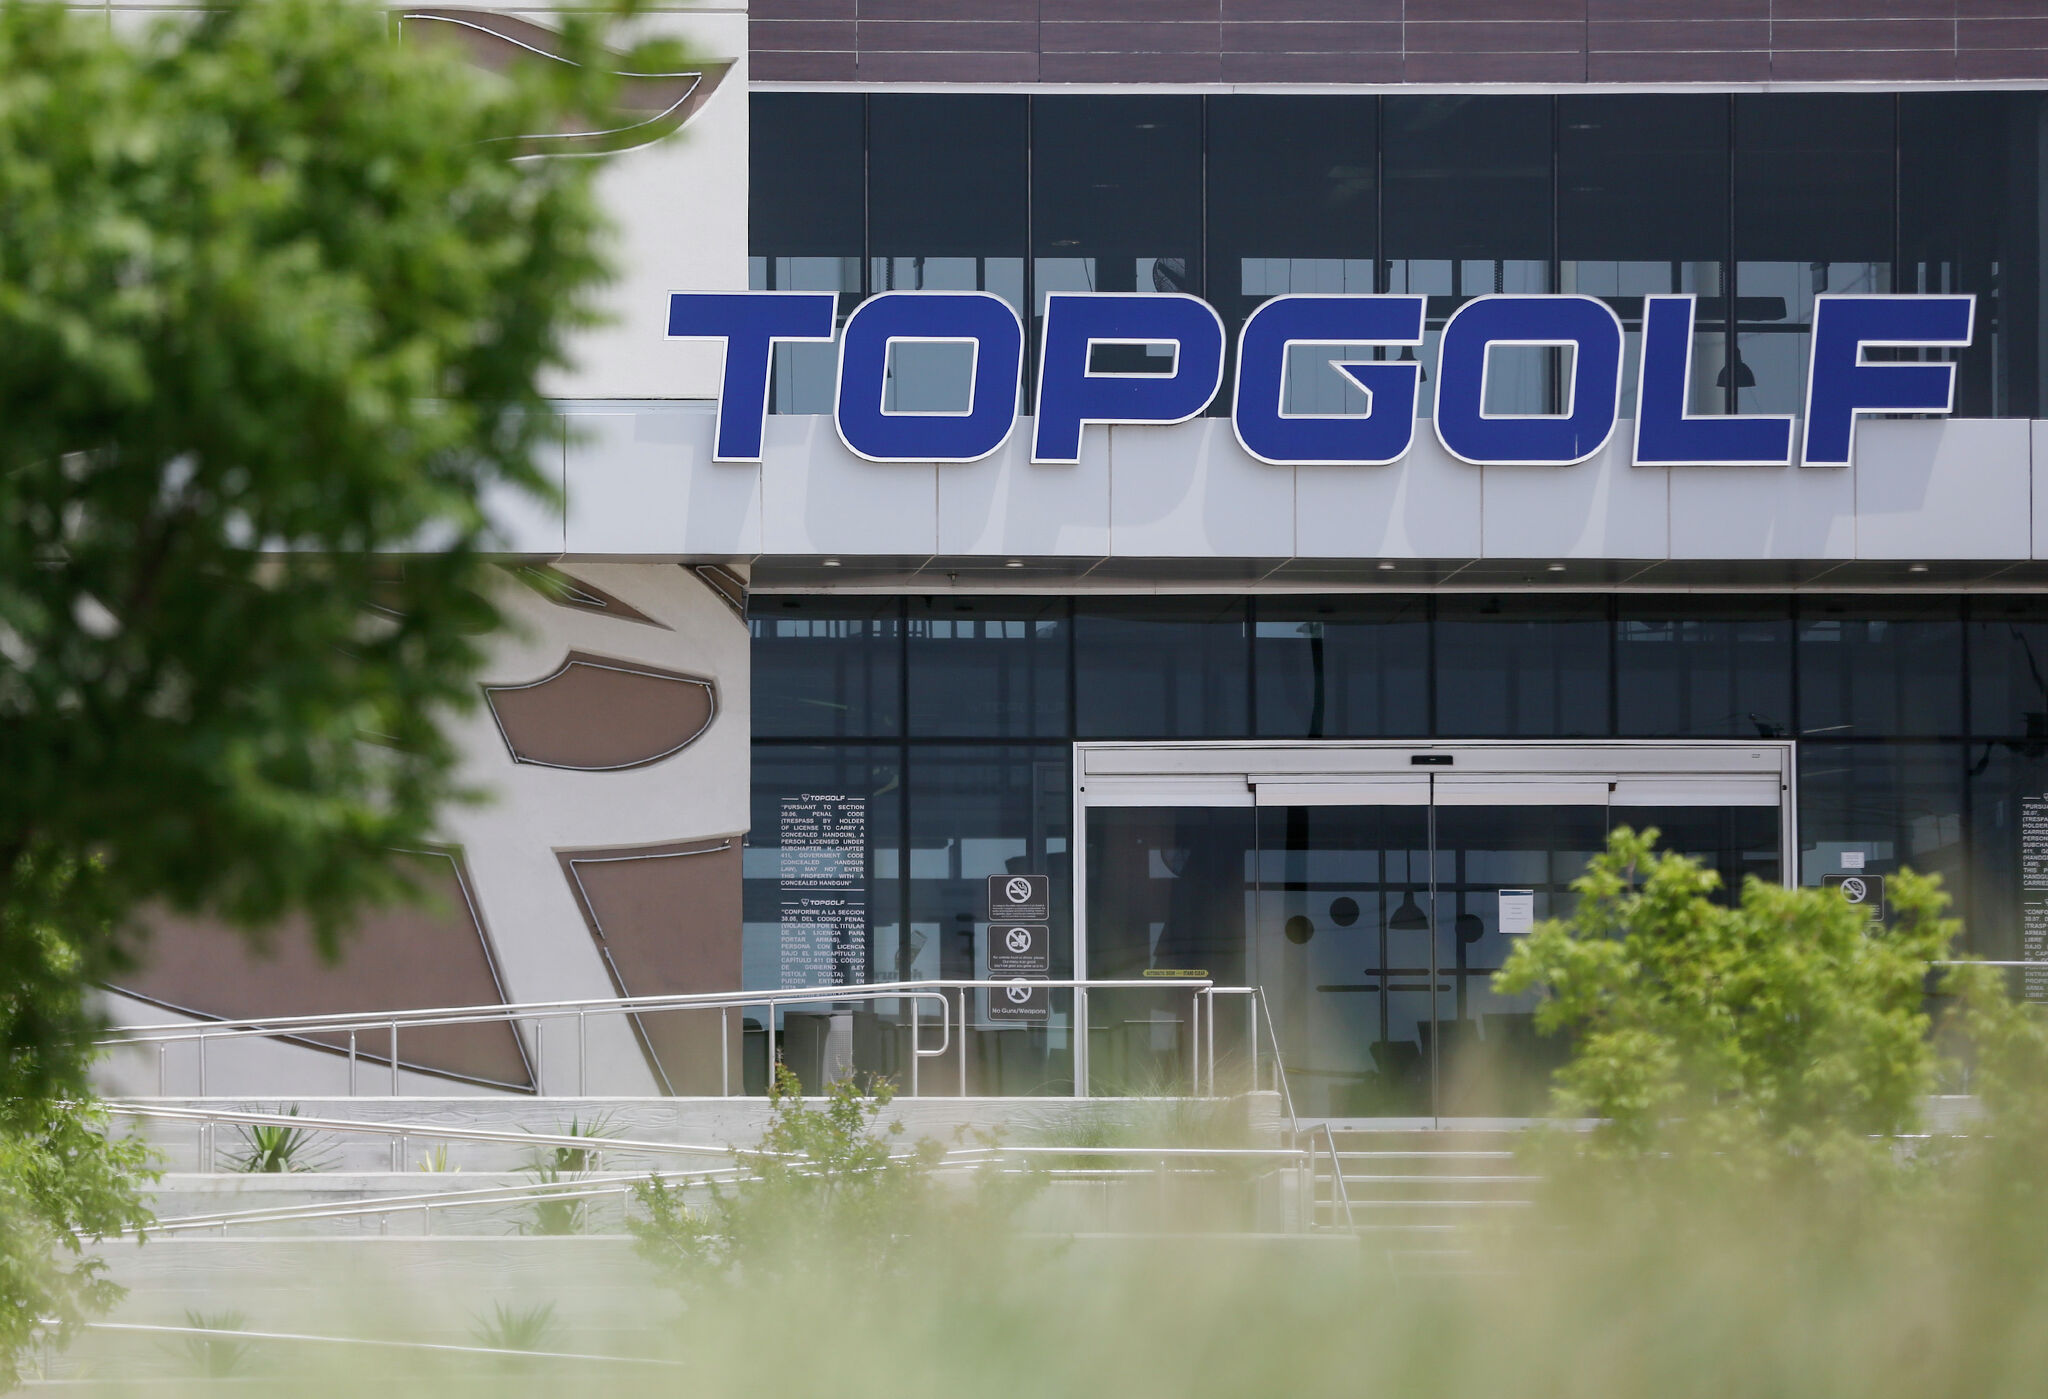 Topgolf is one of the very best things to do in San Antonio